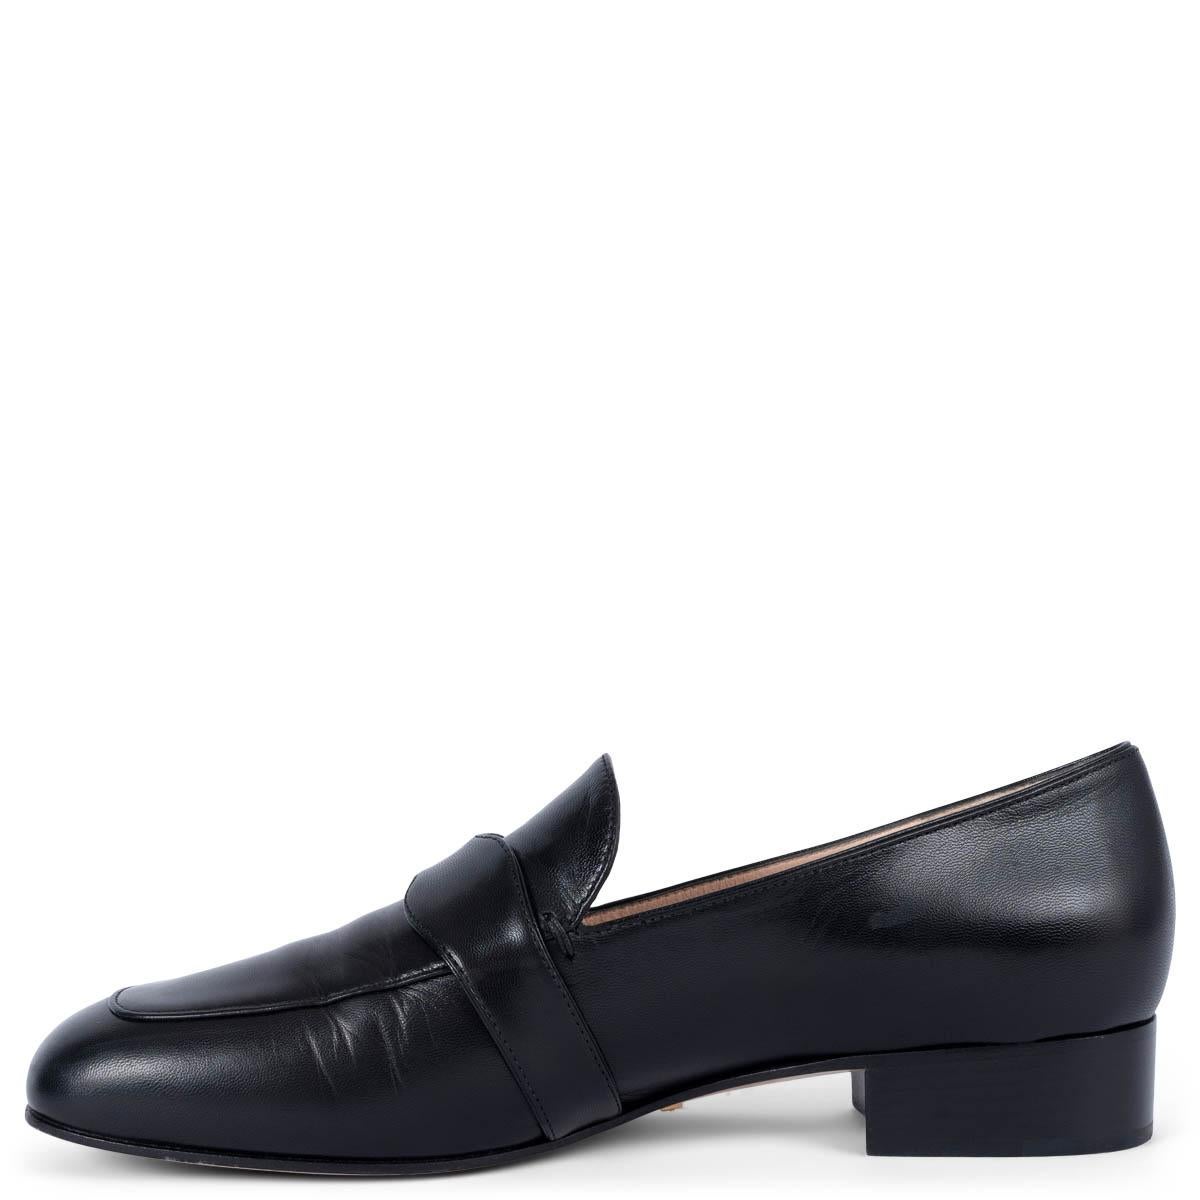 GUCCI black leather GG MARMONT Loafers Shoes 38 In Excellent Condition For Sale In Zürich, CH